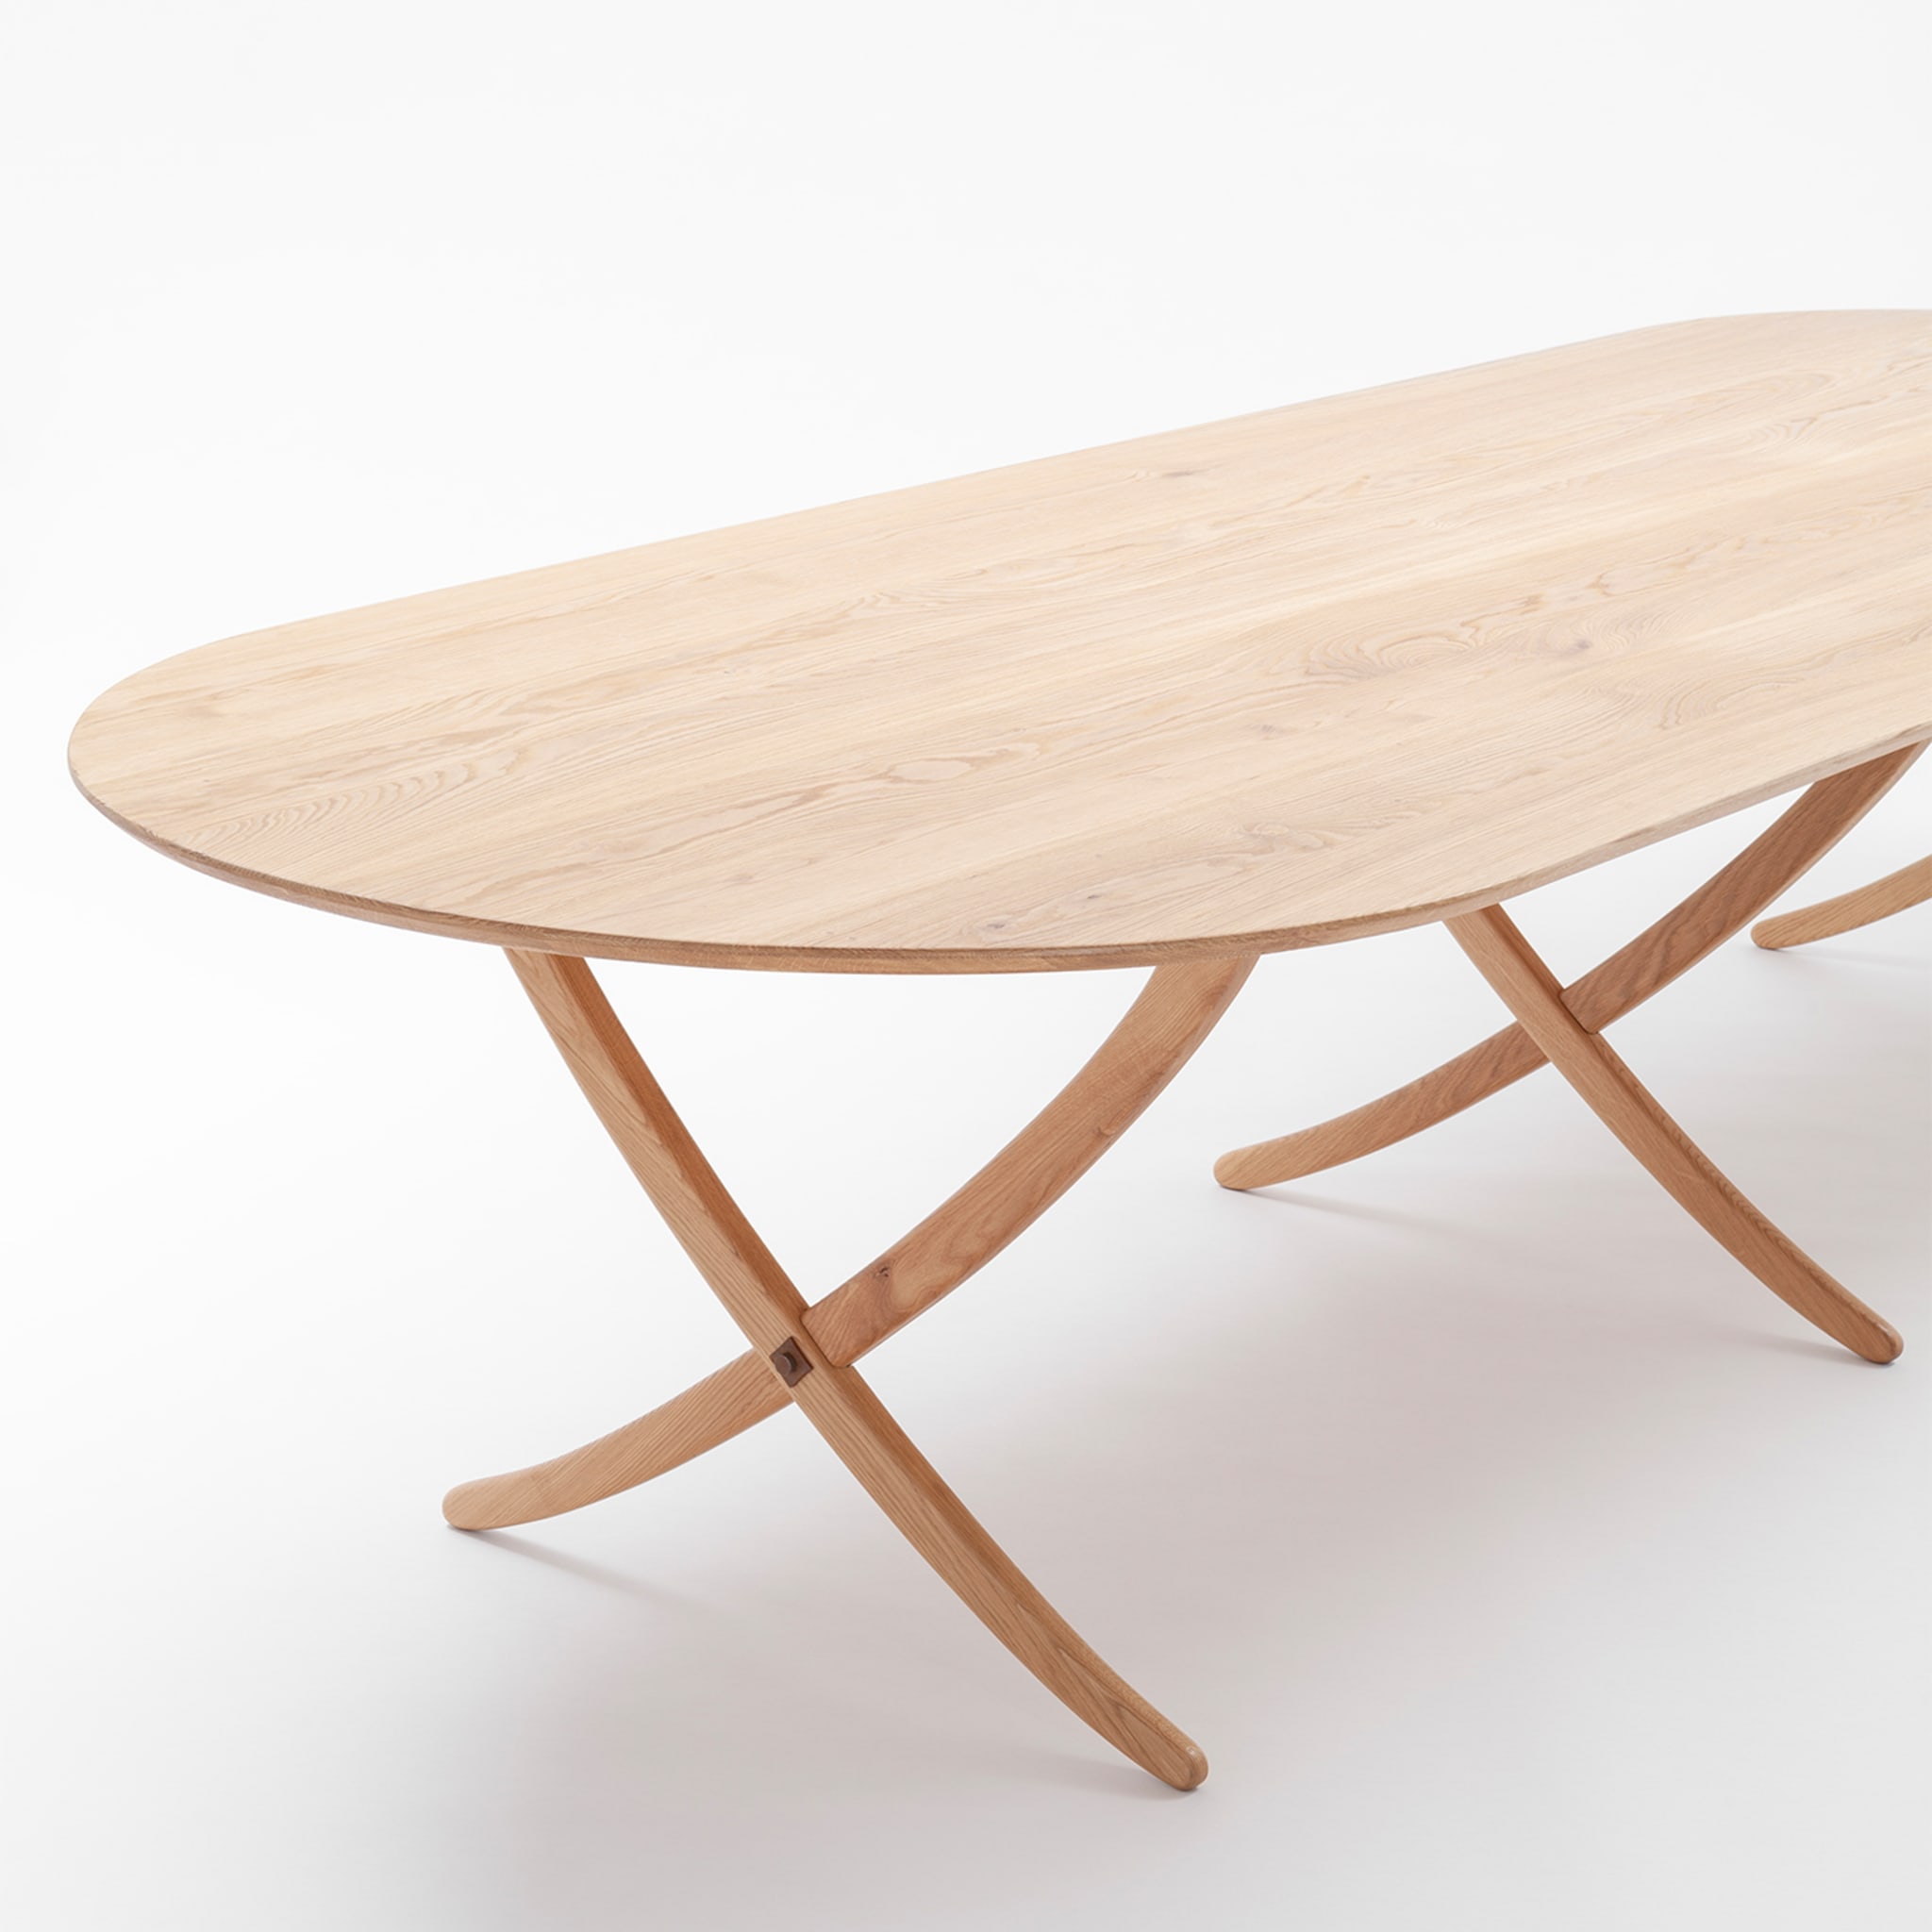 Arch Large Durmast Dining Table - Alternative view 2